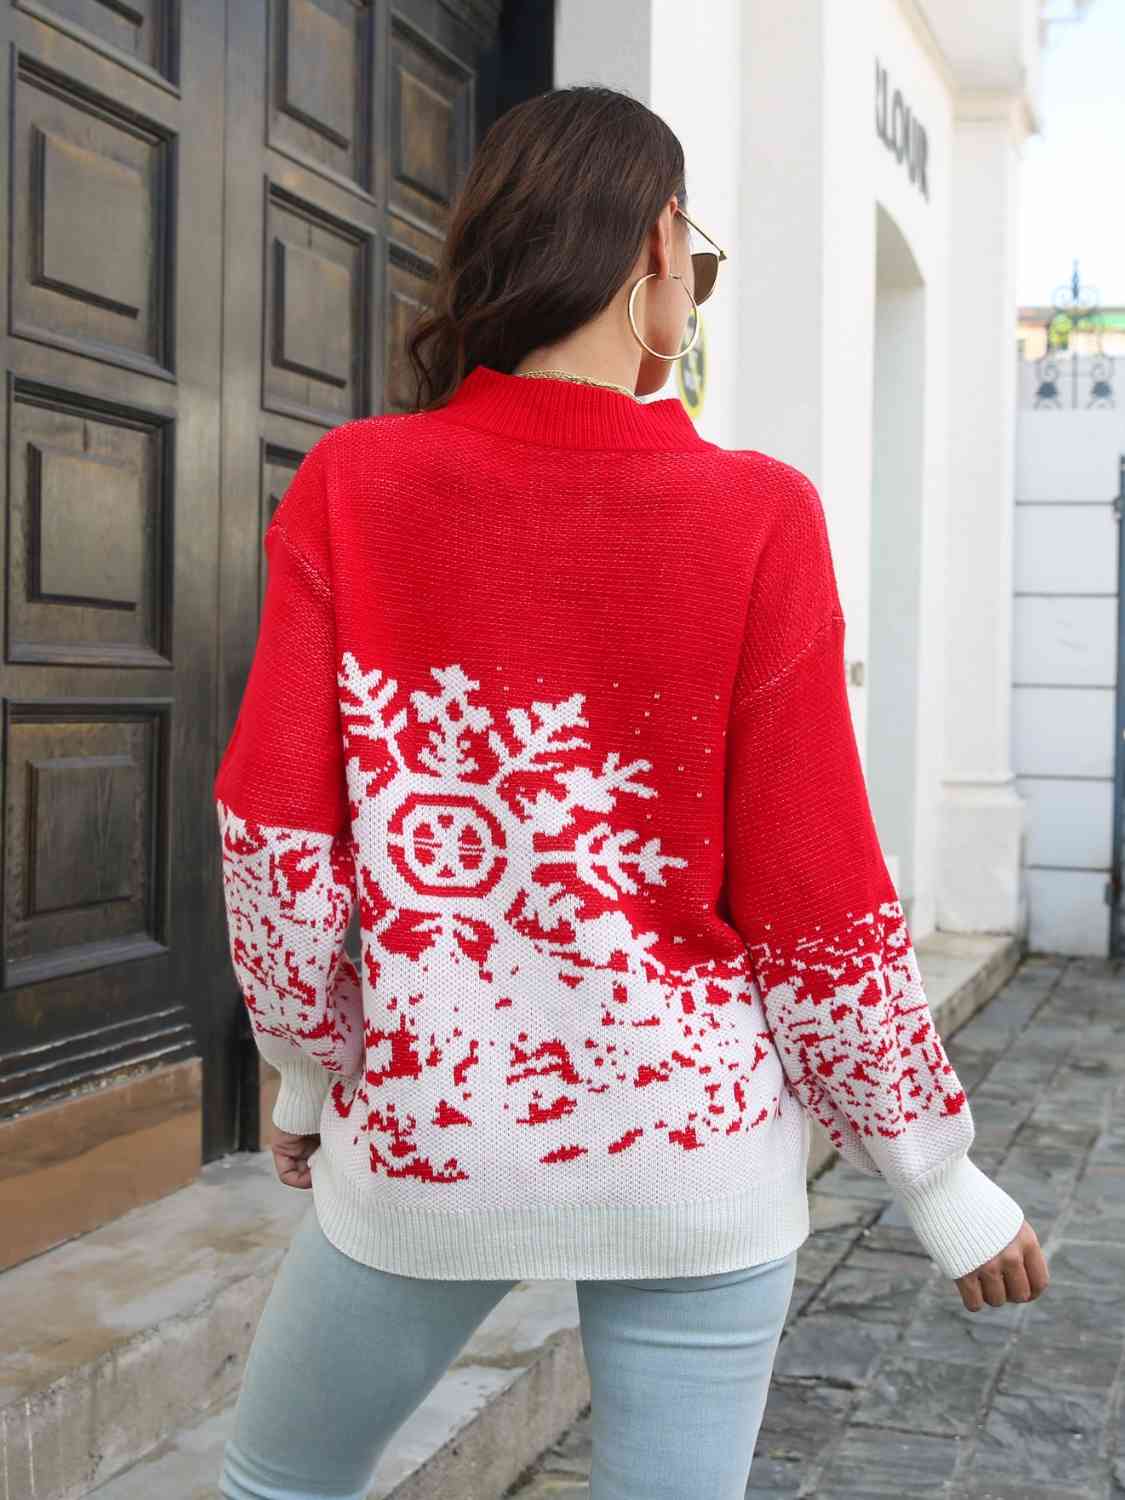 Snowflake Pattern Mock Neck Sweater in red